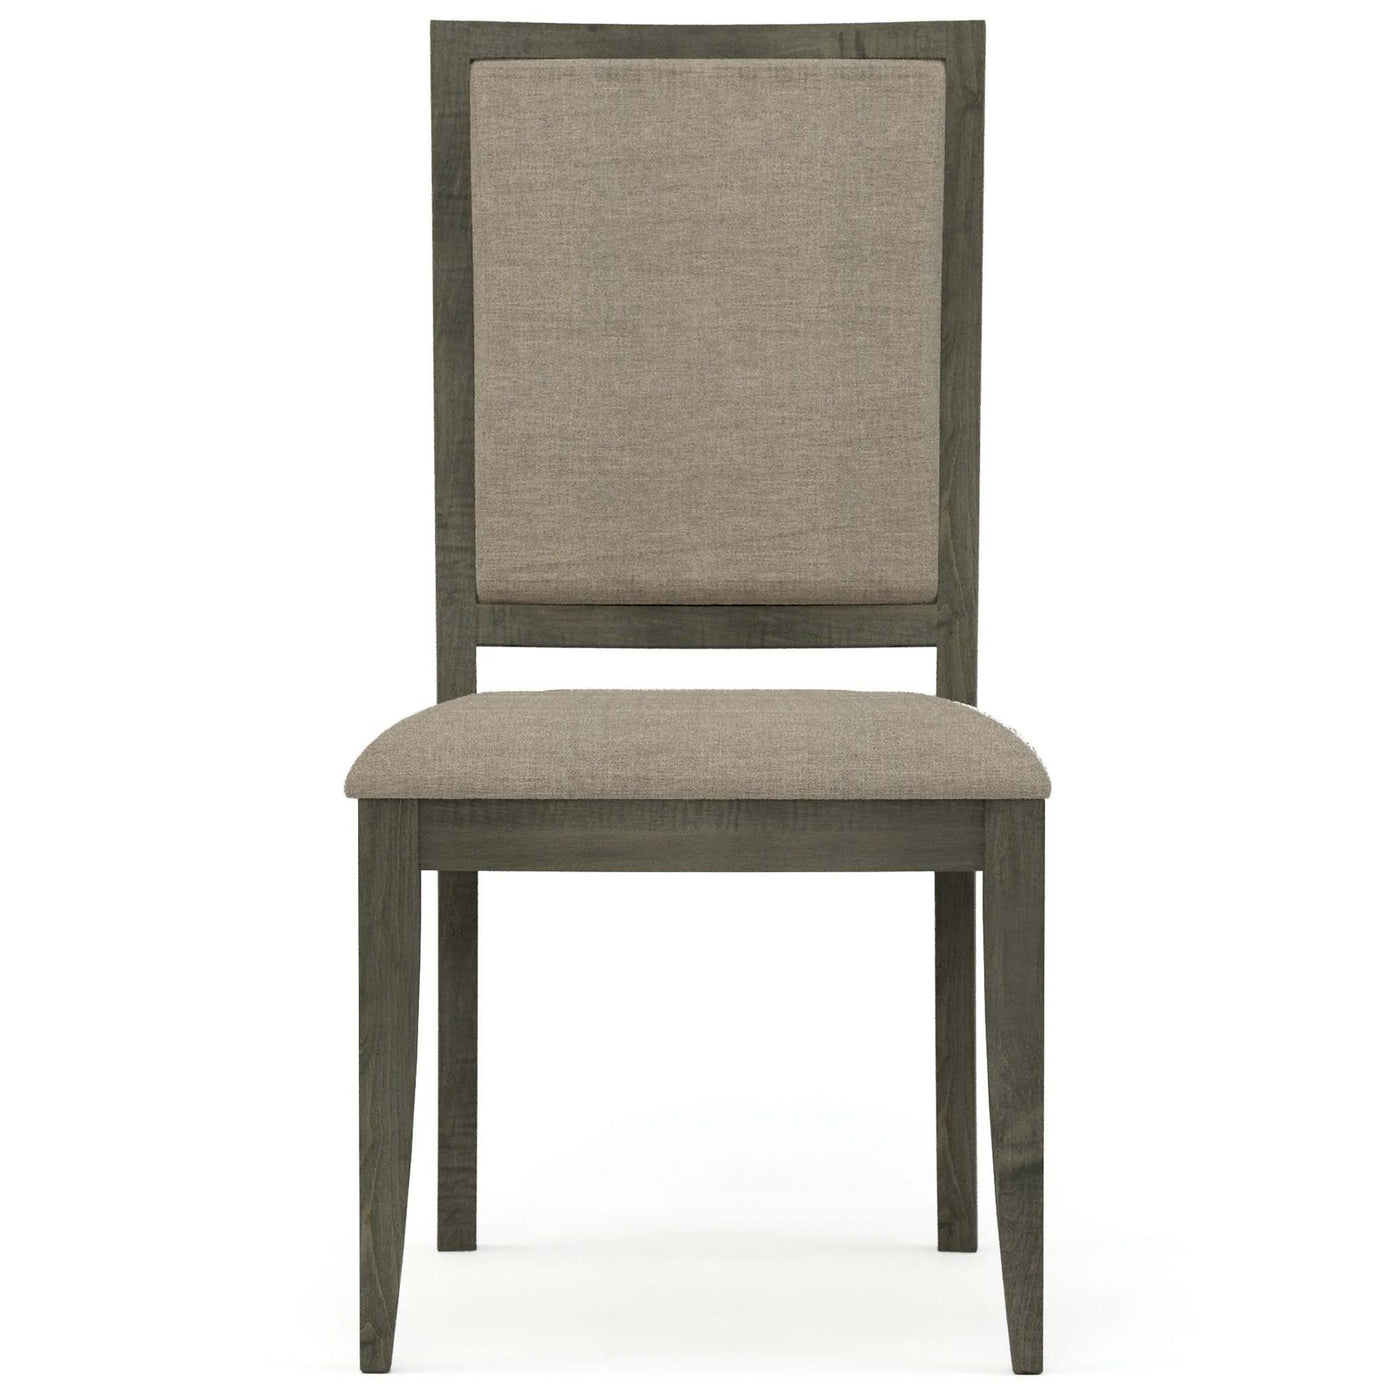 Stickley Origins Upholstered Side Chair Bluff